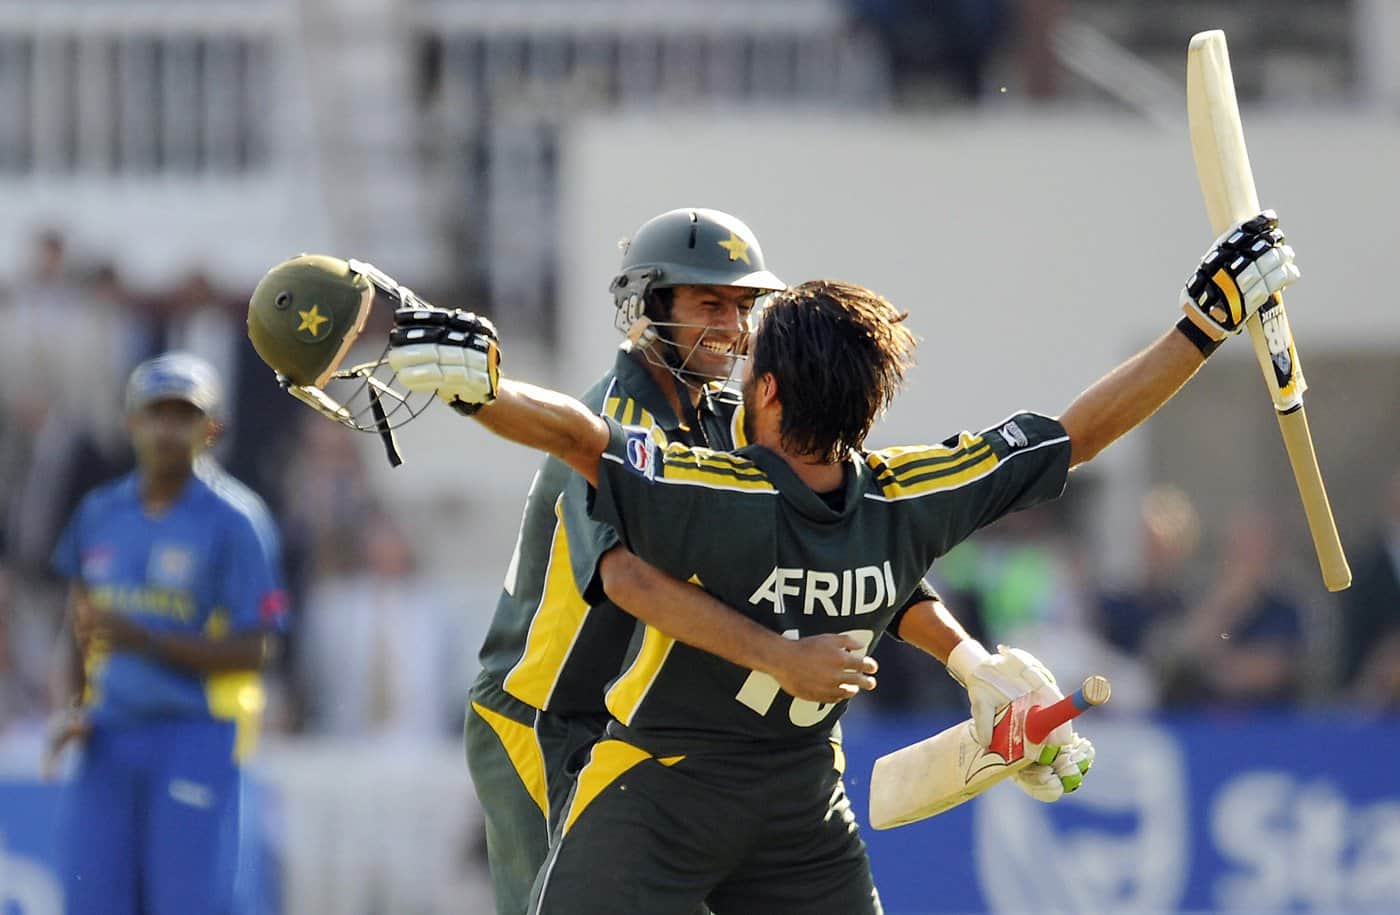 Shahid Afridi: A redemption that elated Pakistan